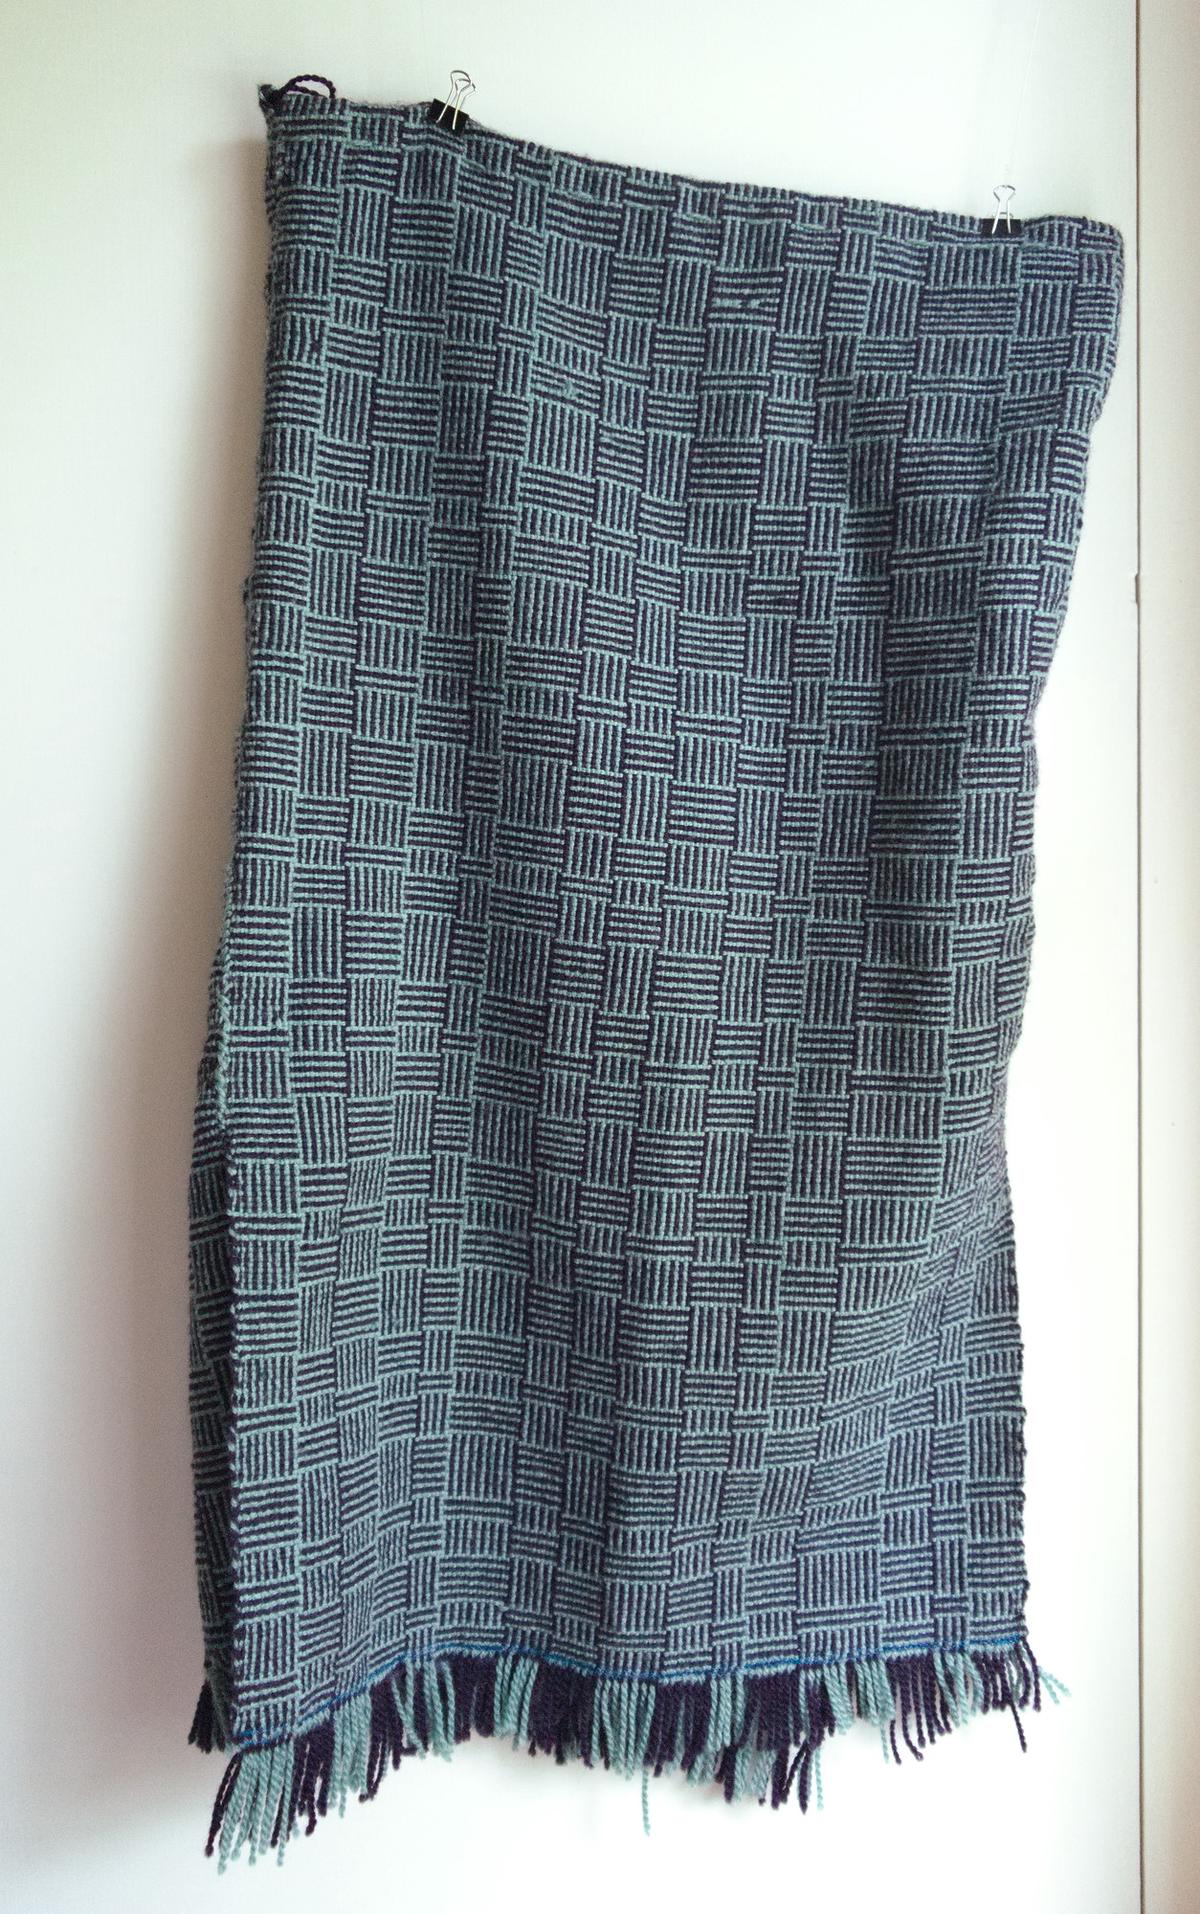 a rectangular skirt with small stripes in sea foam green and dark eggplant purple, hanging in front of a white wall.